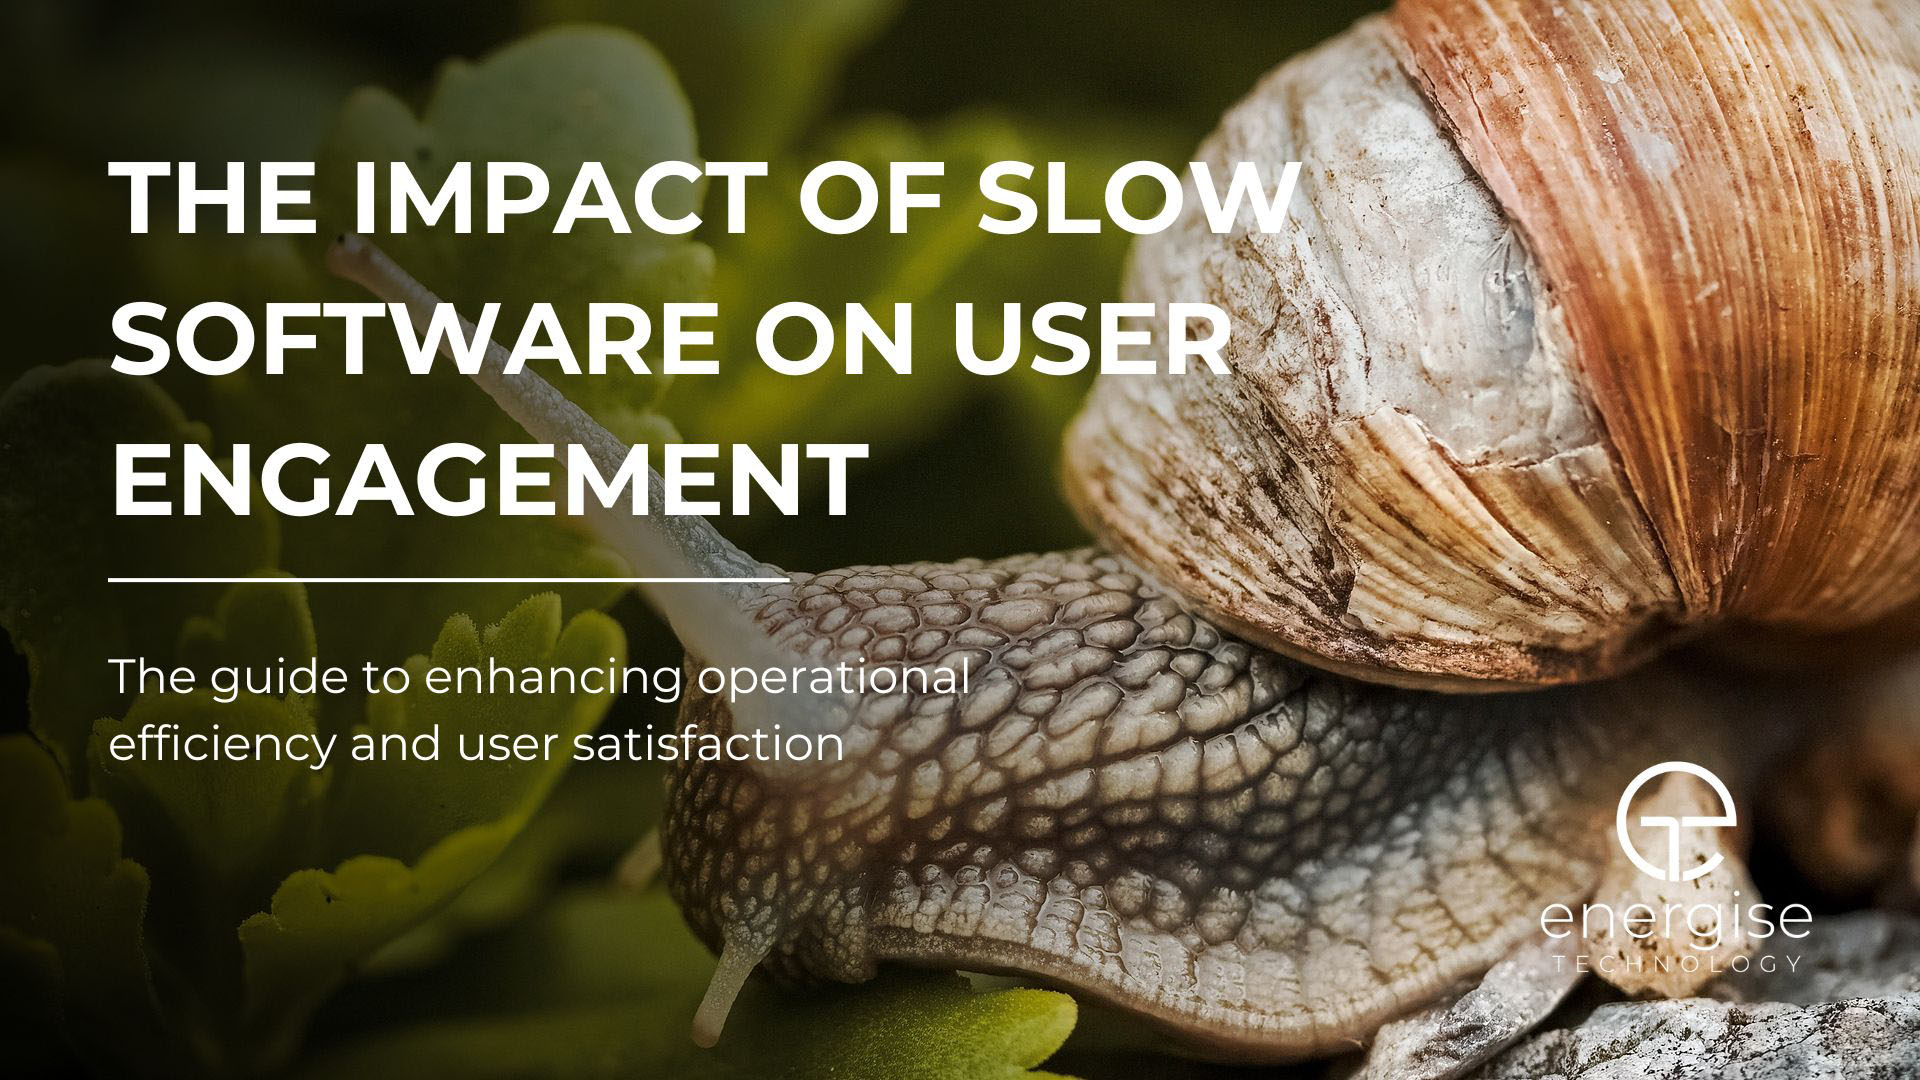 The Impact of Slow Software on User Engagement